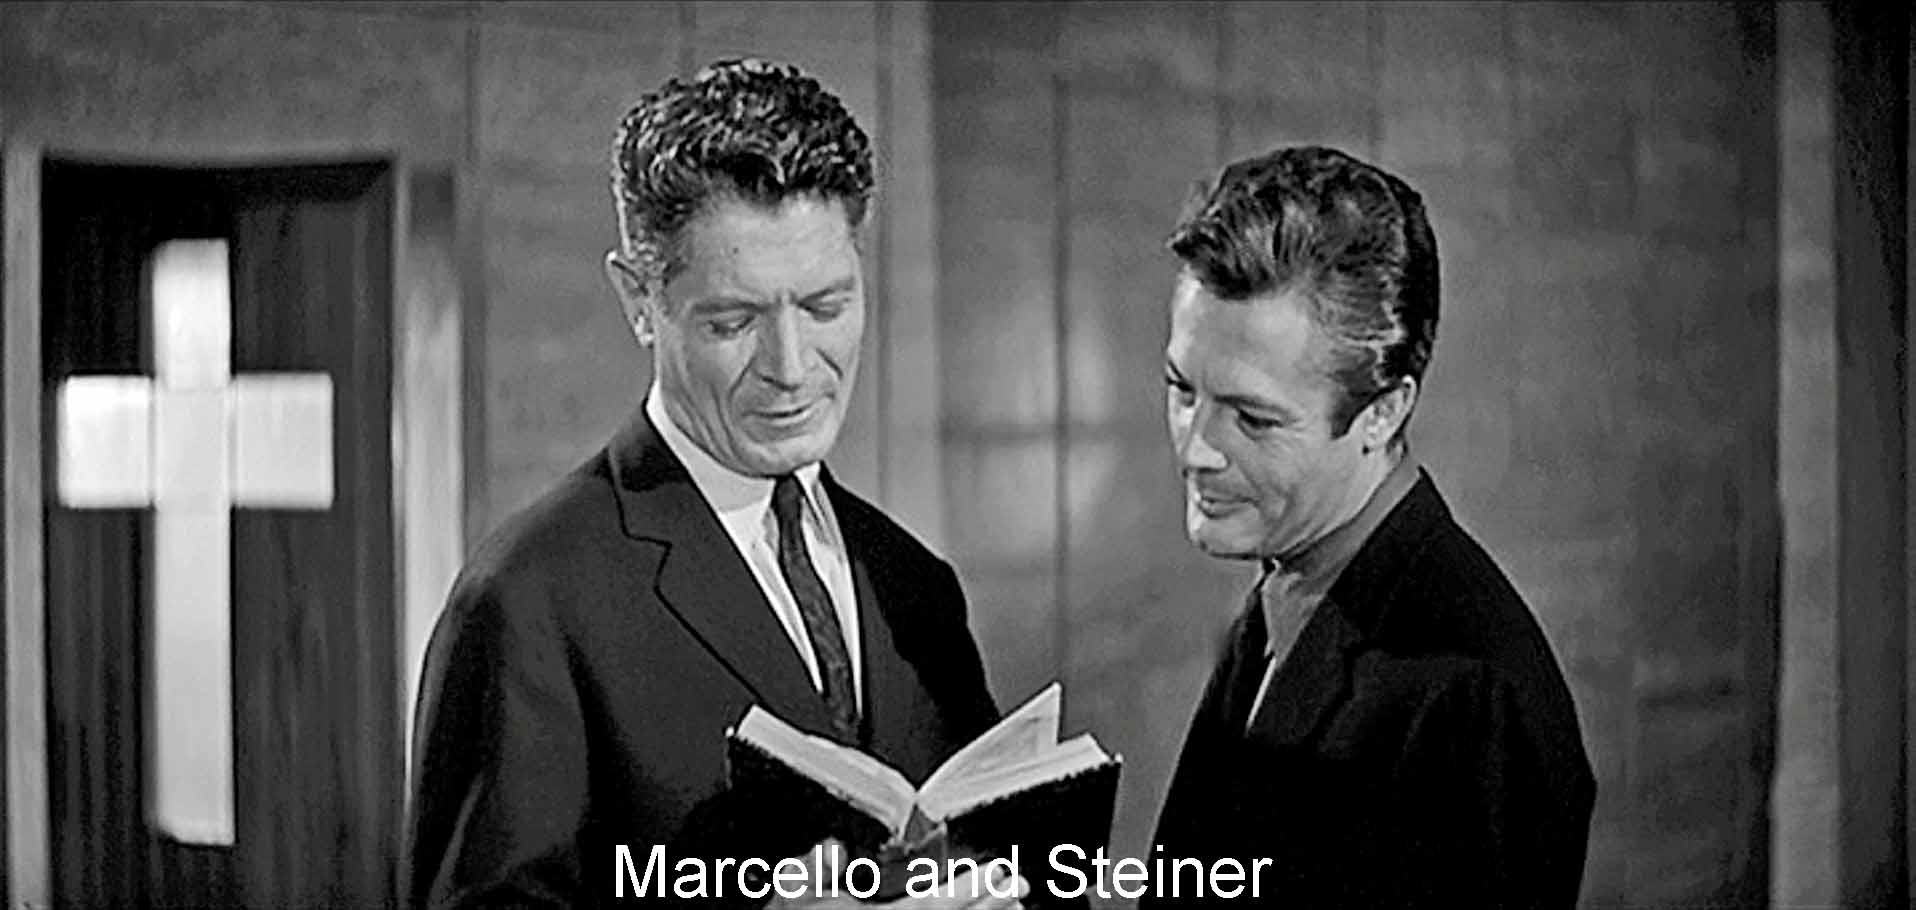 Marcello and Steiner